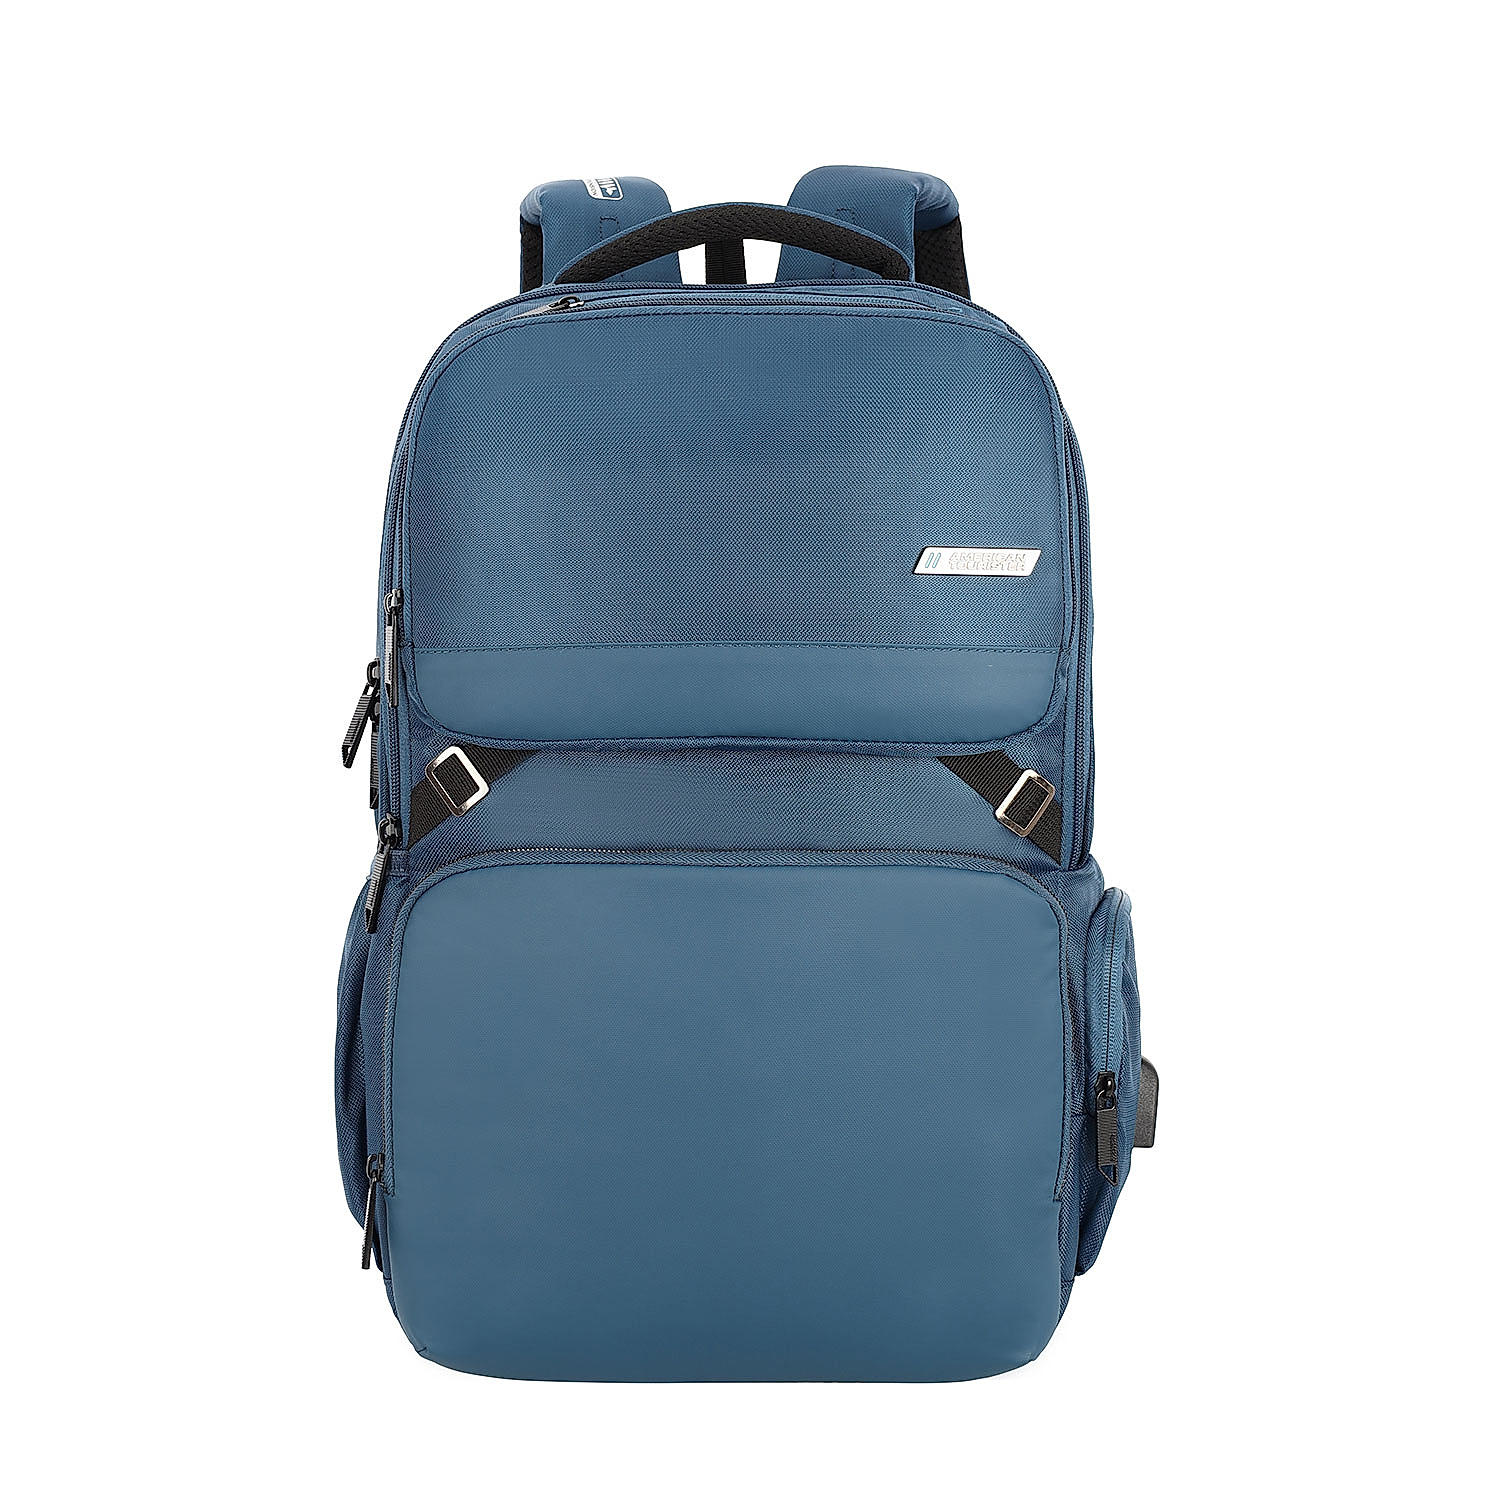 Buy Blue Segno 2.0 Backpack 03 (Detachable) Online at American ...